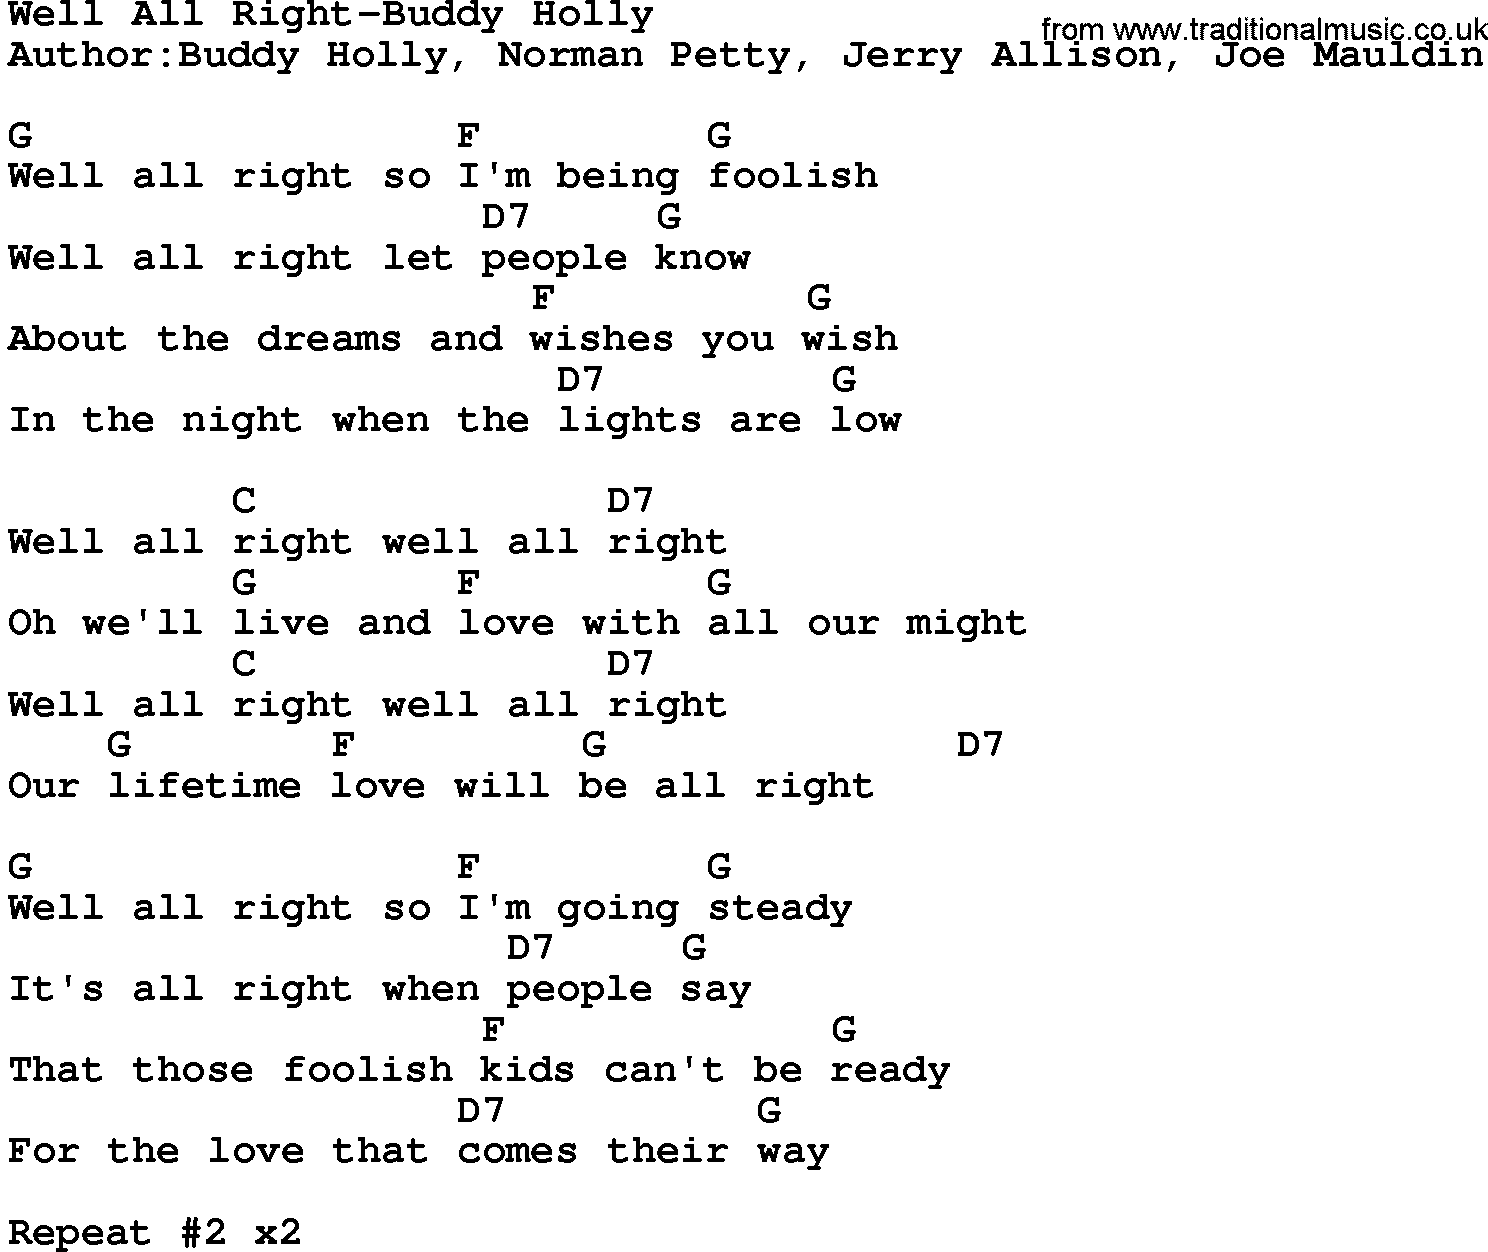 Country music song: Well All Right-Buddy Holly lyrics and chords